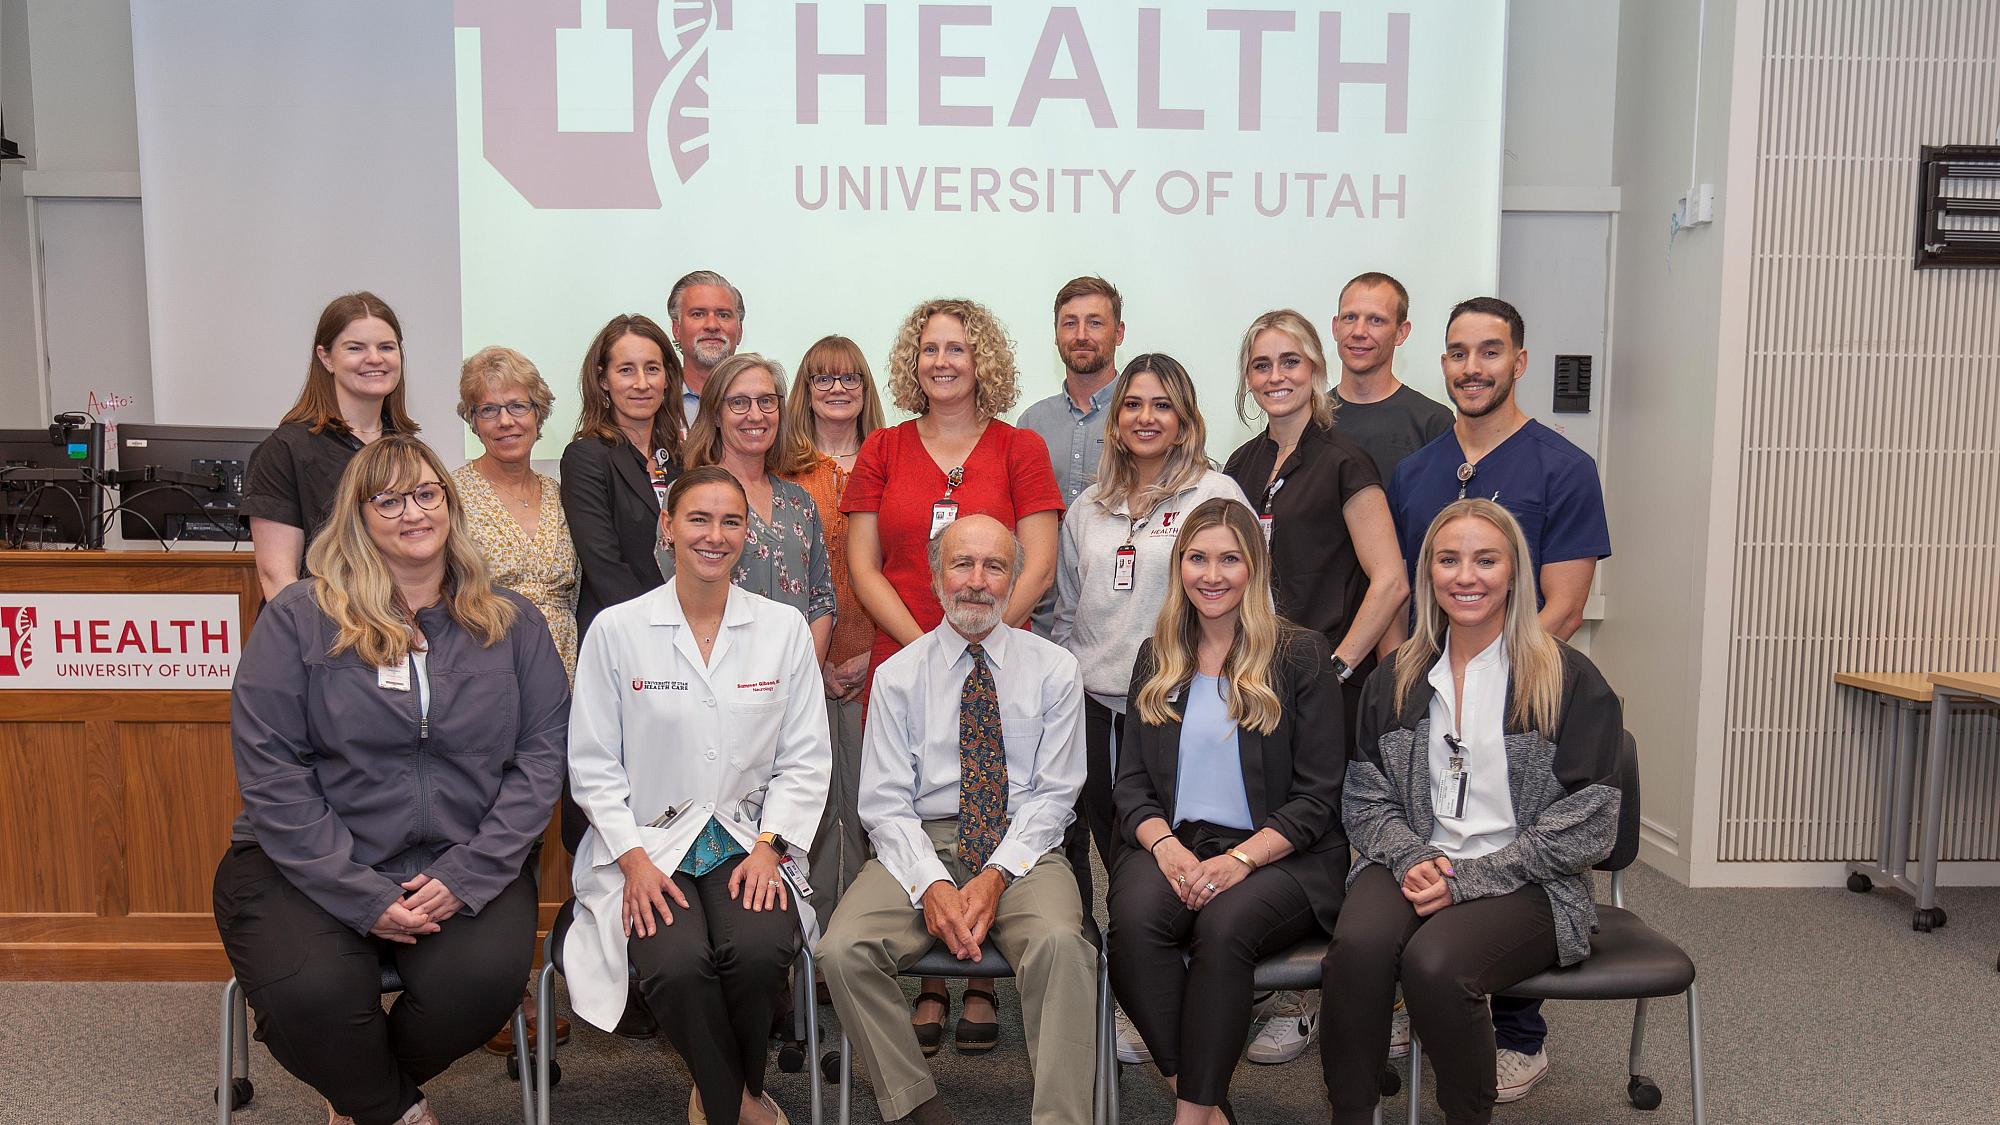 Group shot of ALS providers and staff sitting and standing in front of the U of U Health logo projected onto a screen